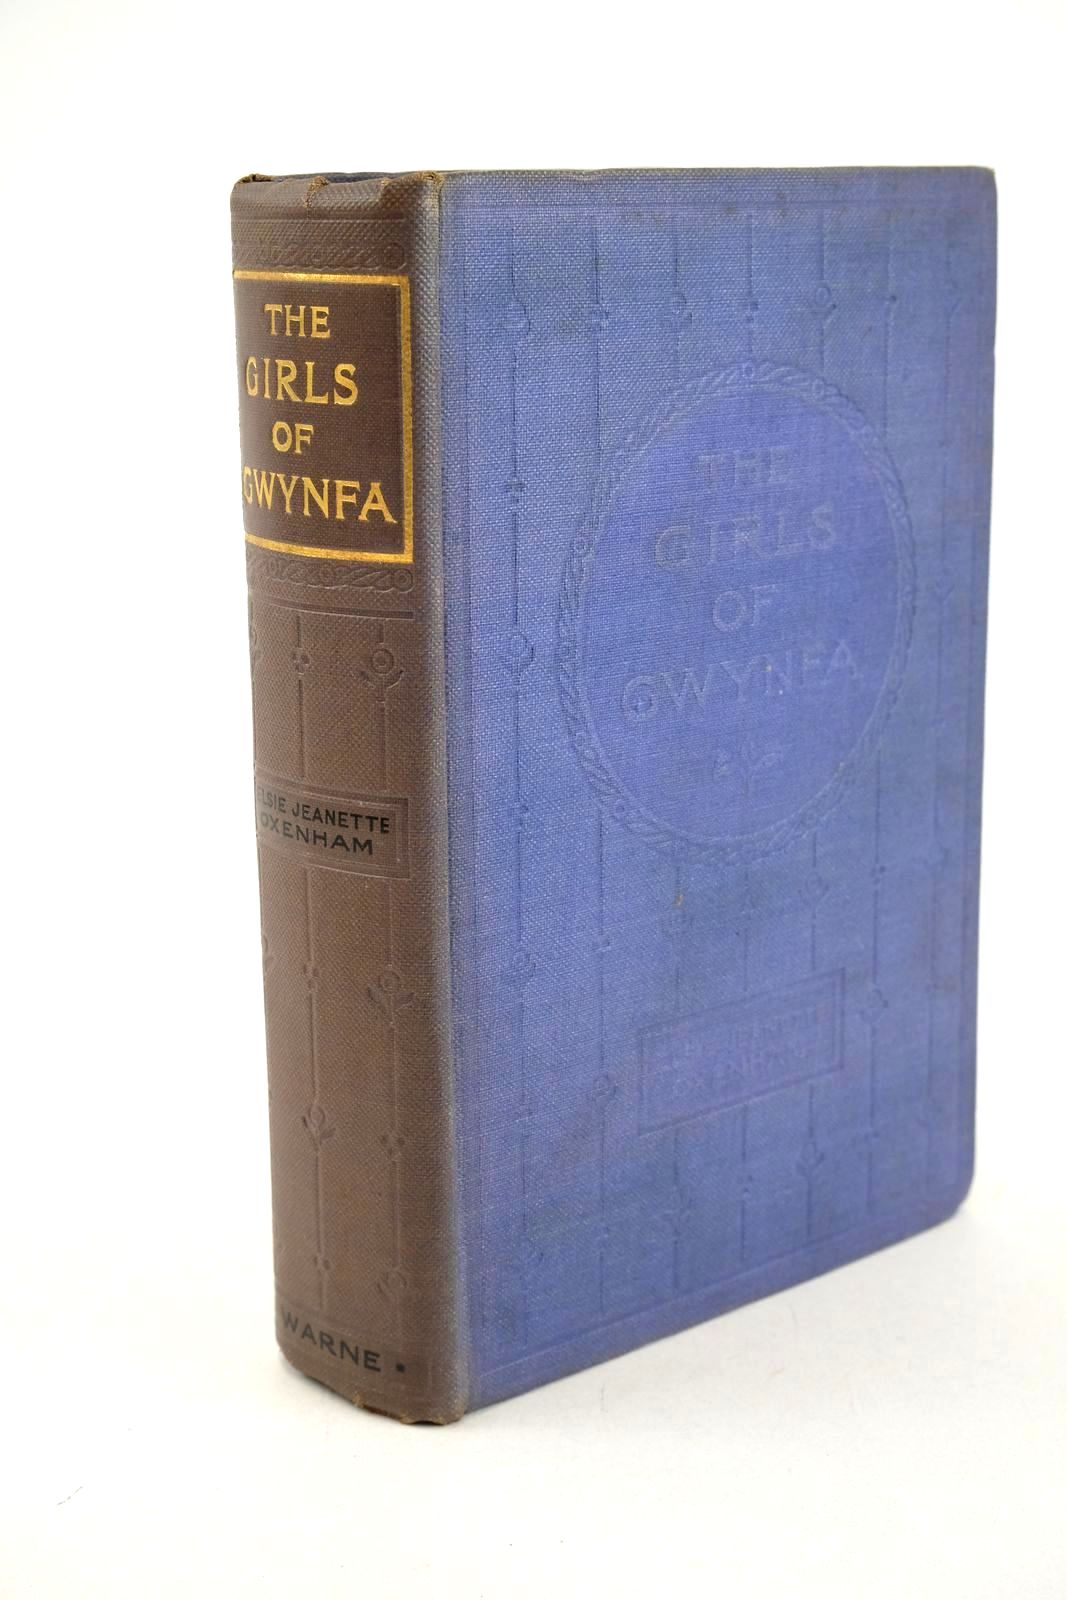 Photo of THE GIRLS OF GWYNFA written by Oxenham, Elsie J. illustrated by Brisley, Nina K. published by Frederick Warne &amp; Co Ltd. (STOCK CODE: 1327262)  for sale by Stella & Rose's Books